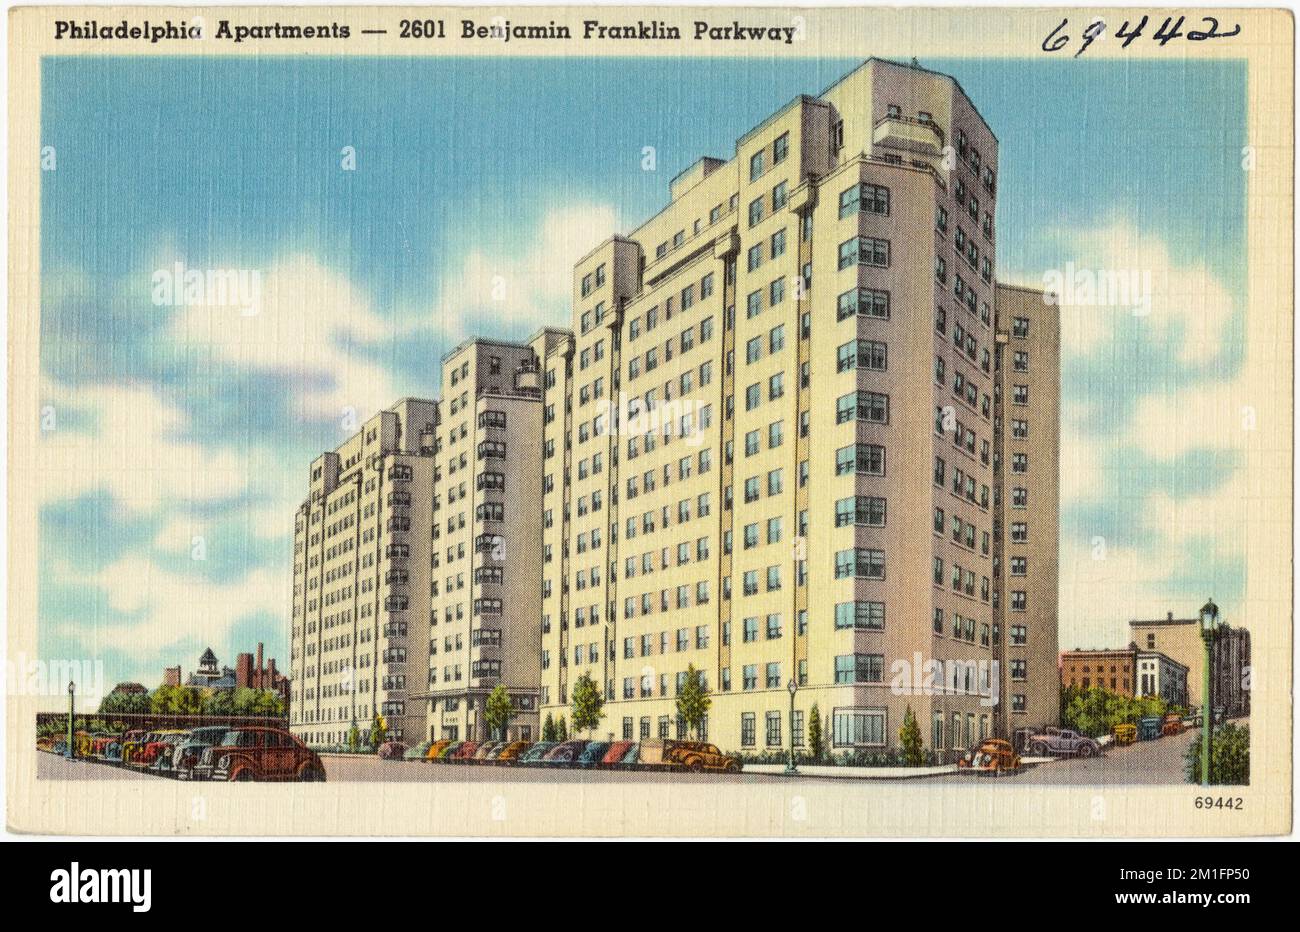 Philadelphia Apartments - 2601 Benjamin Franklin Parkway , Tichnor Brothers Collection, postcards of the United States Stock Photo